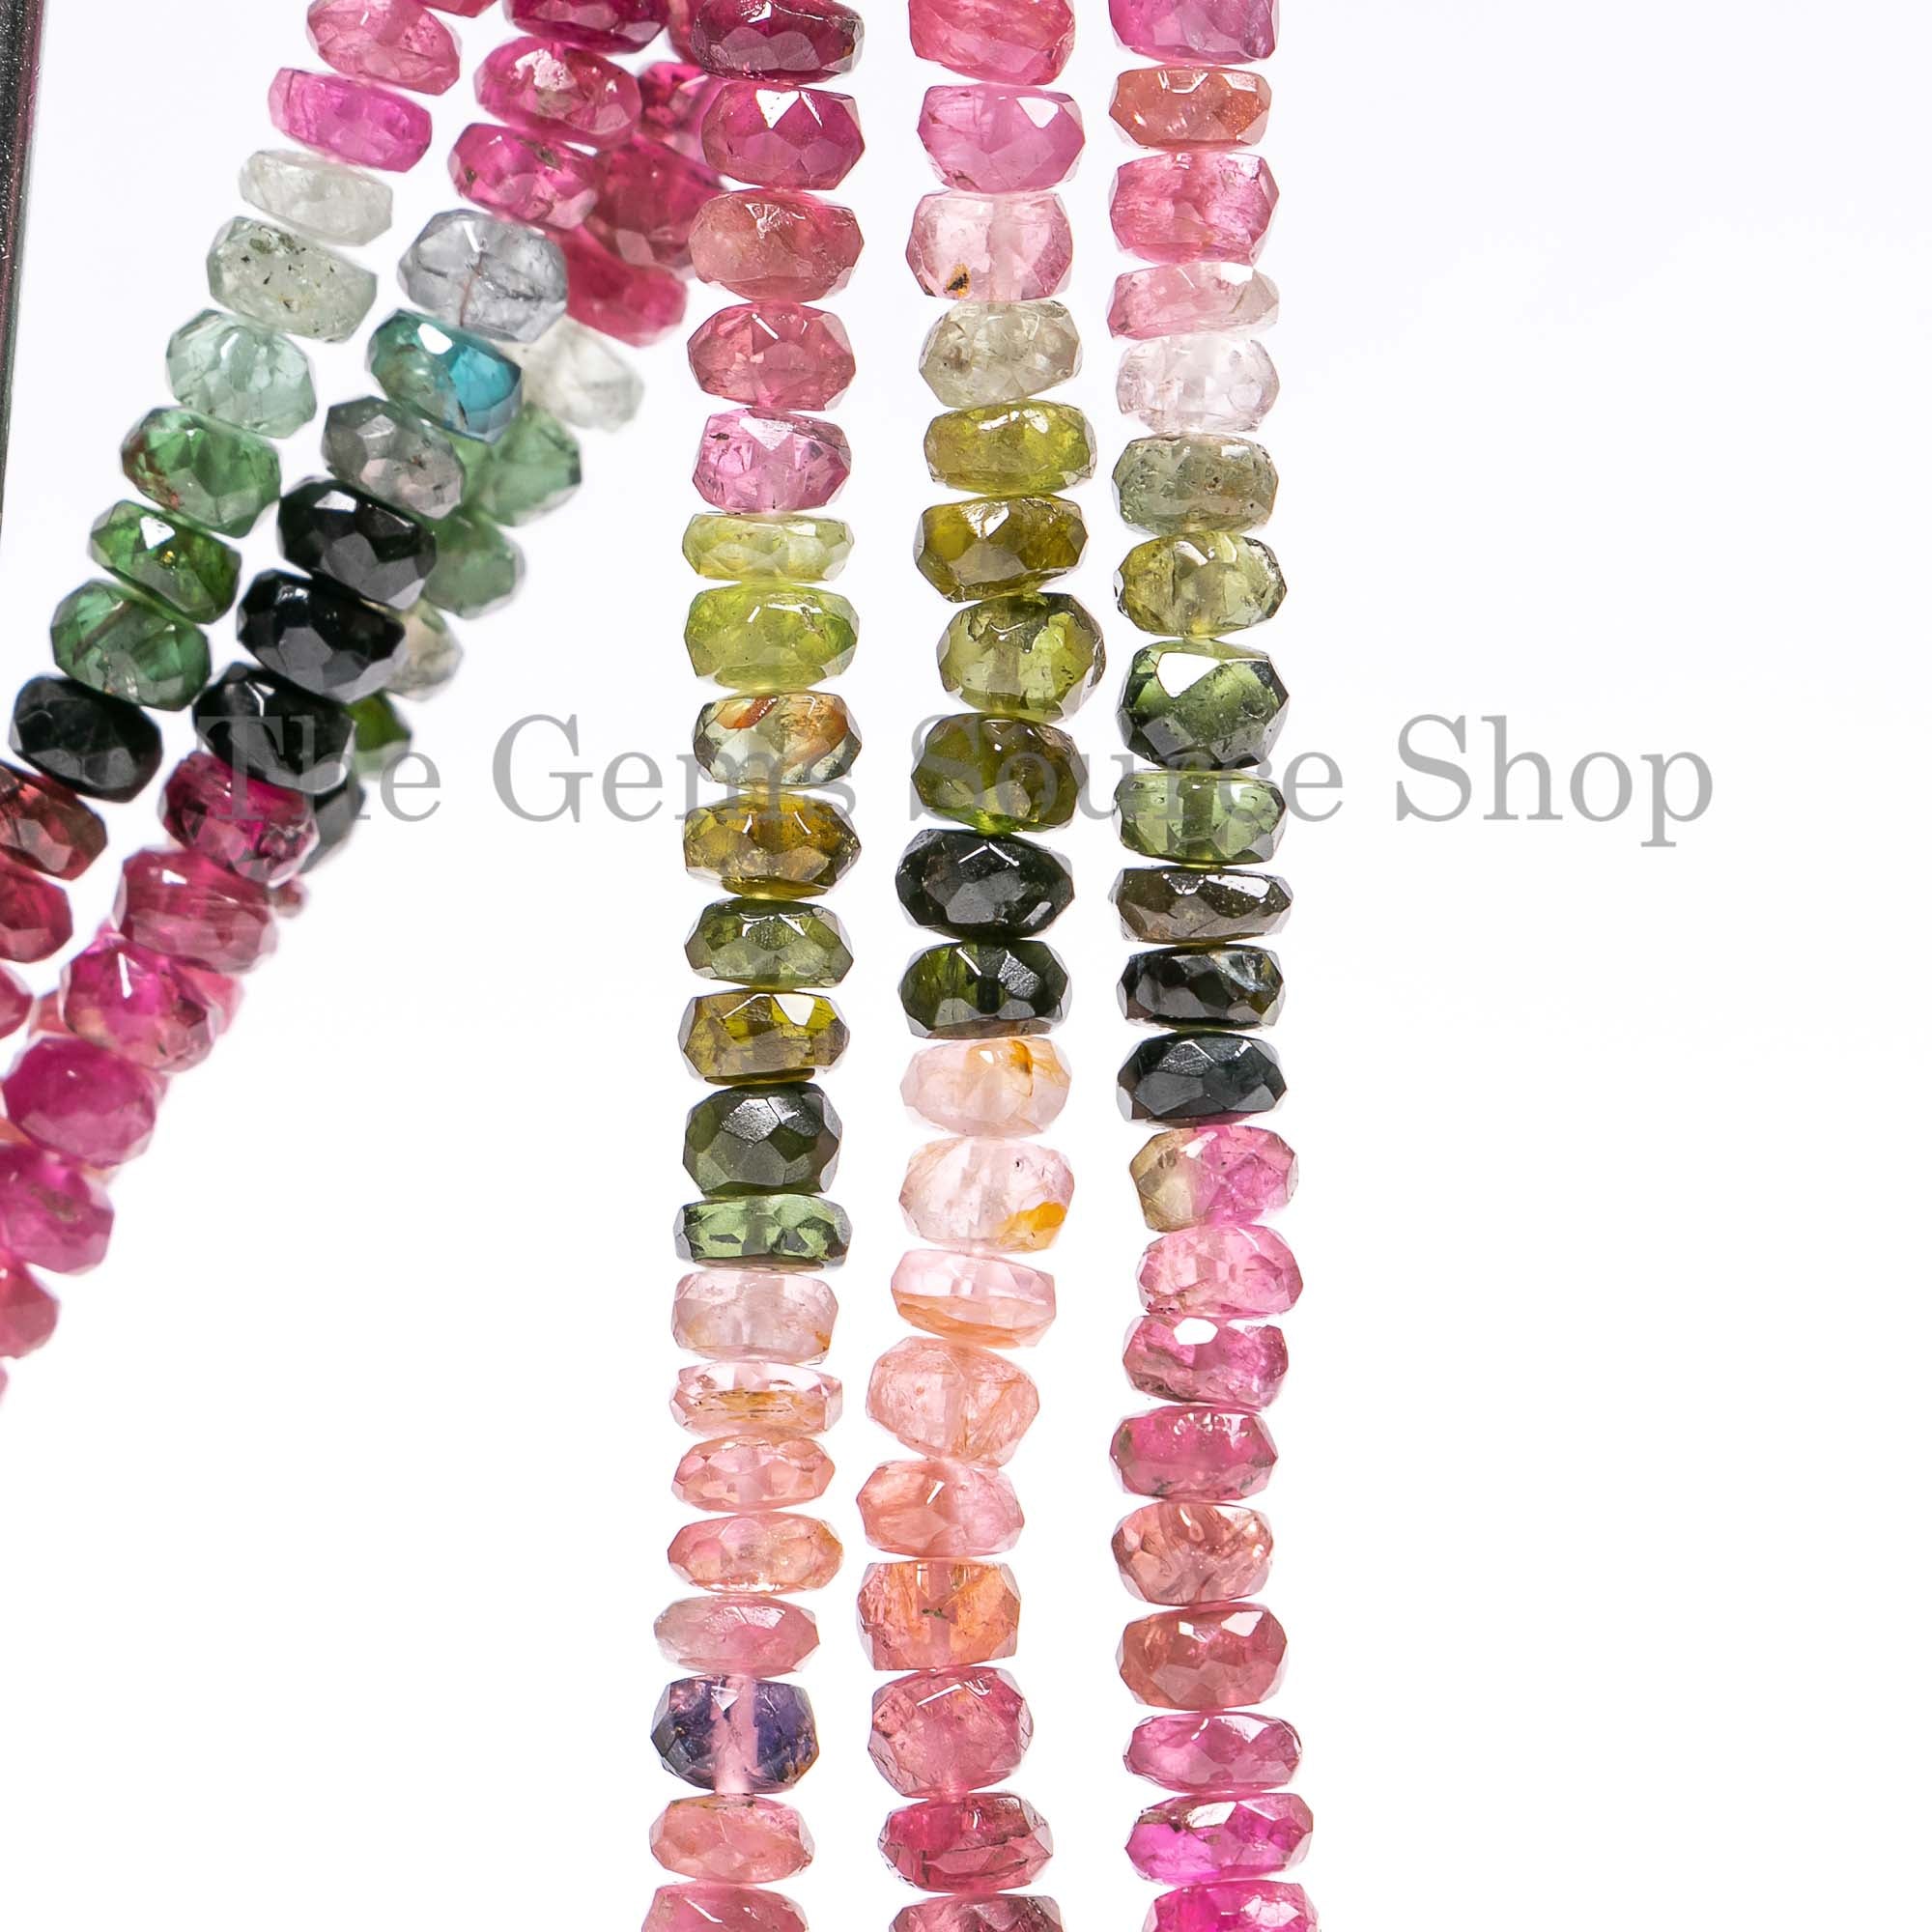 Natural Multi Tourmaline Beads, Tourmaline Faceted Rondelle Beads, Wholesale Gemstone Beads